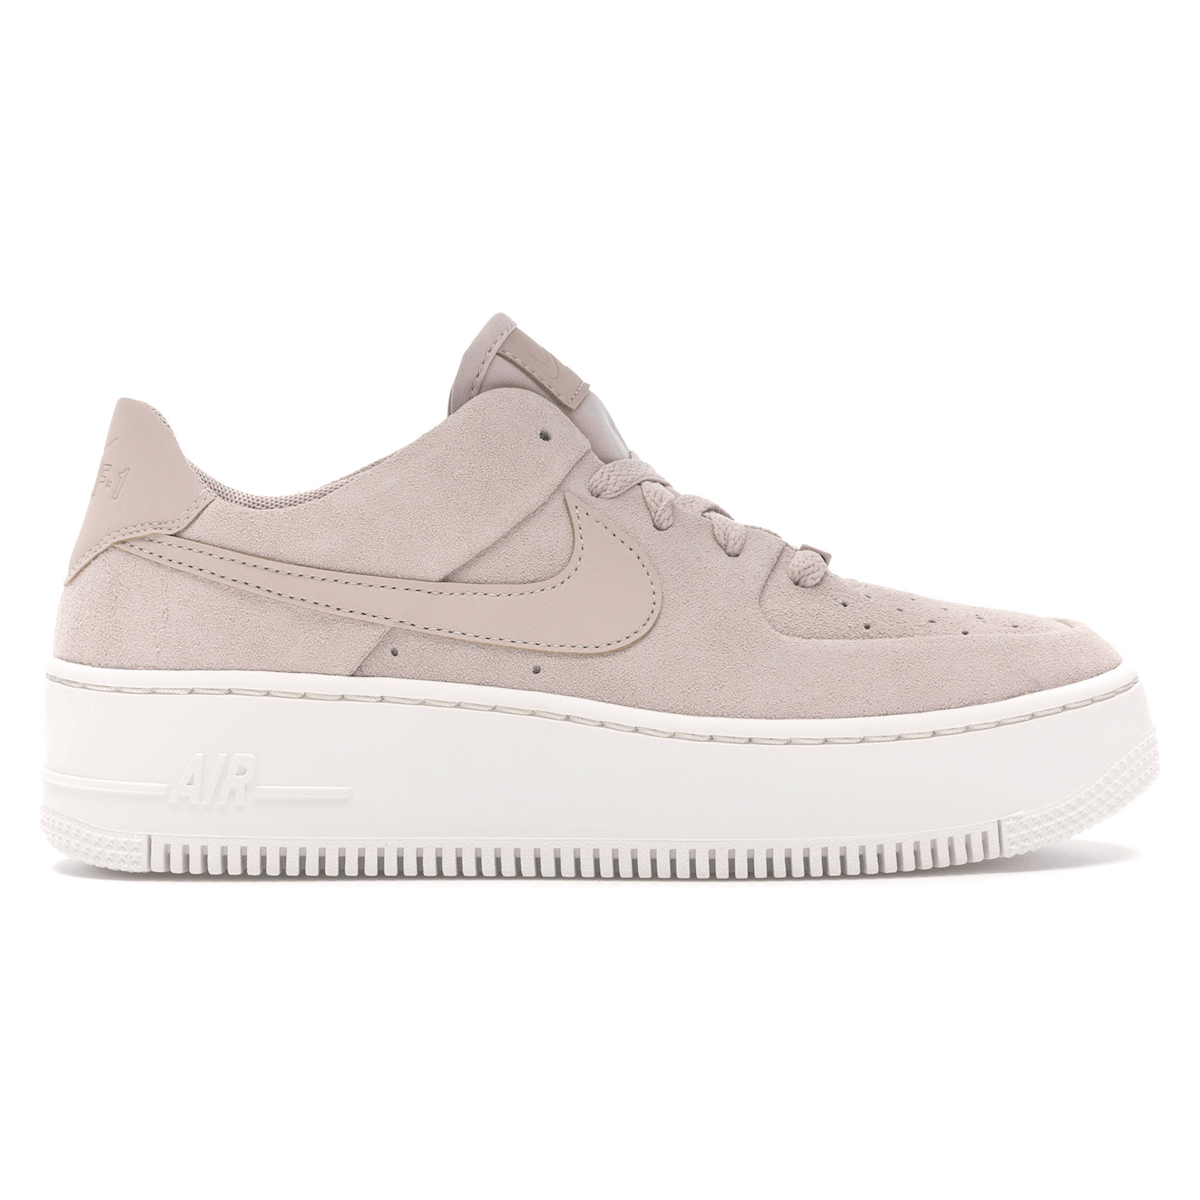 Nike Air Force 1 Sage Low Wmns "Particle Beige"